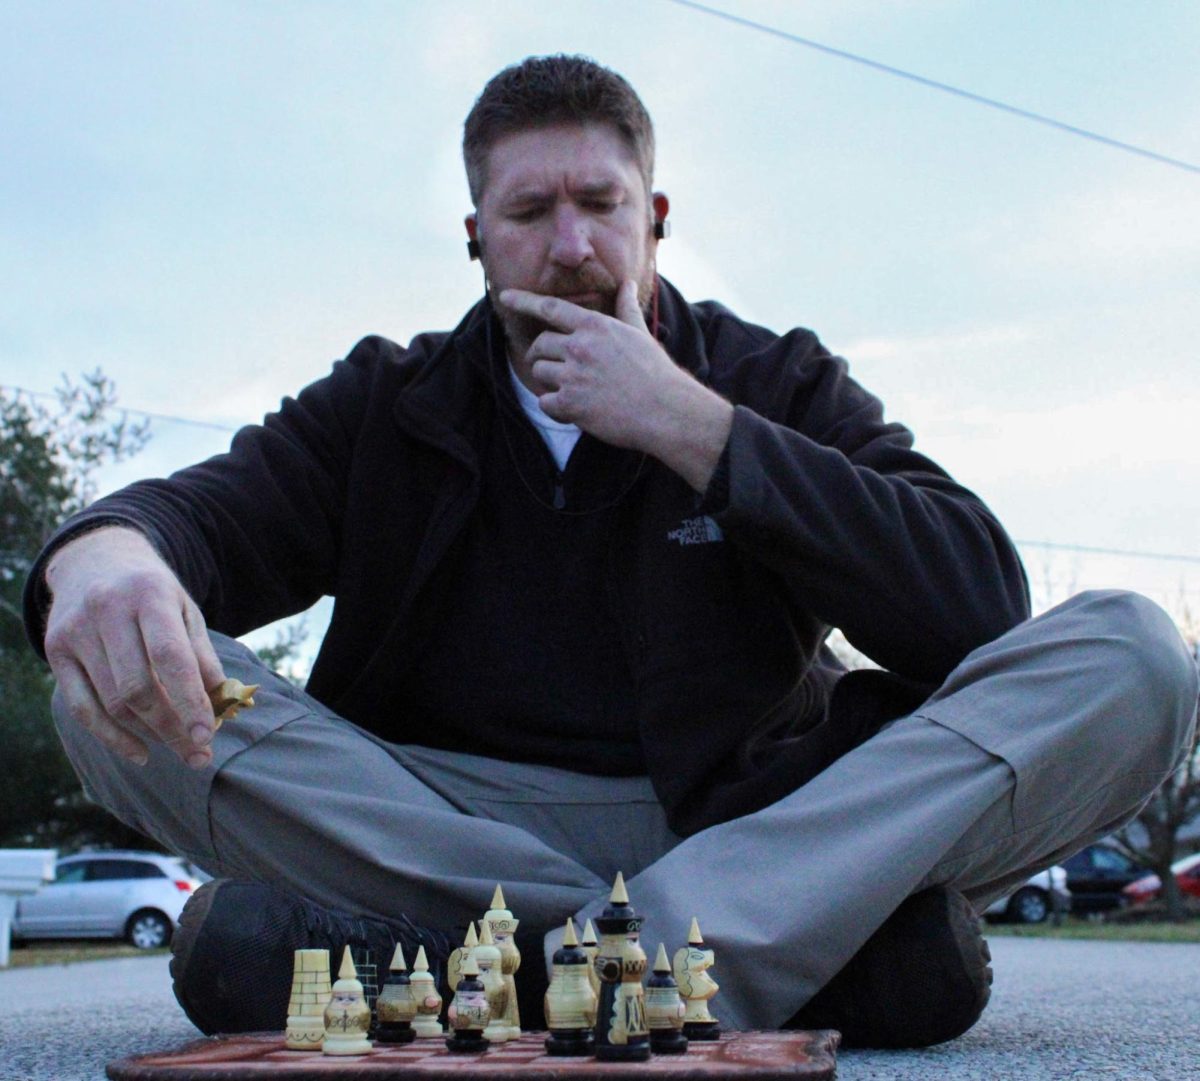 Parent Aaron Bearup thinks about what his next move is gonna be in a game of Chess, while playing in the middle of the road.